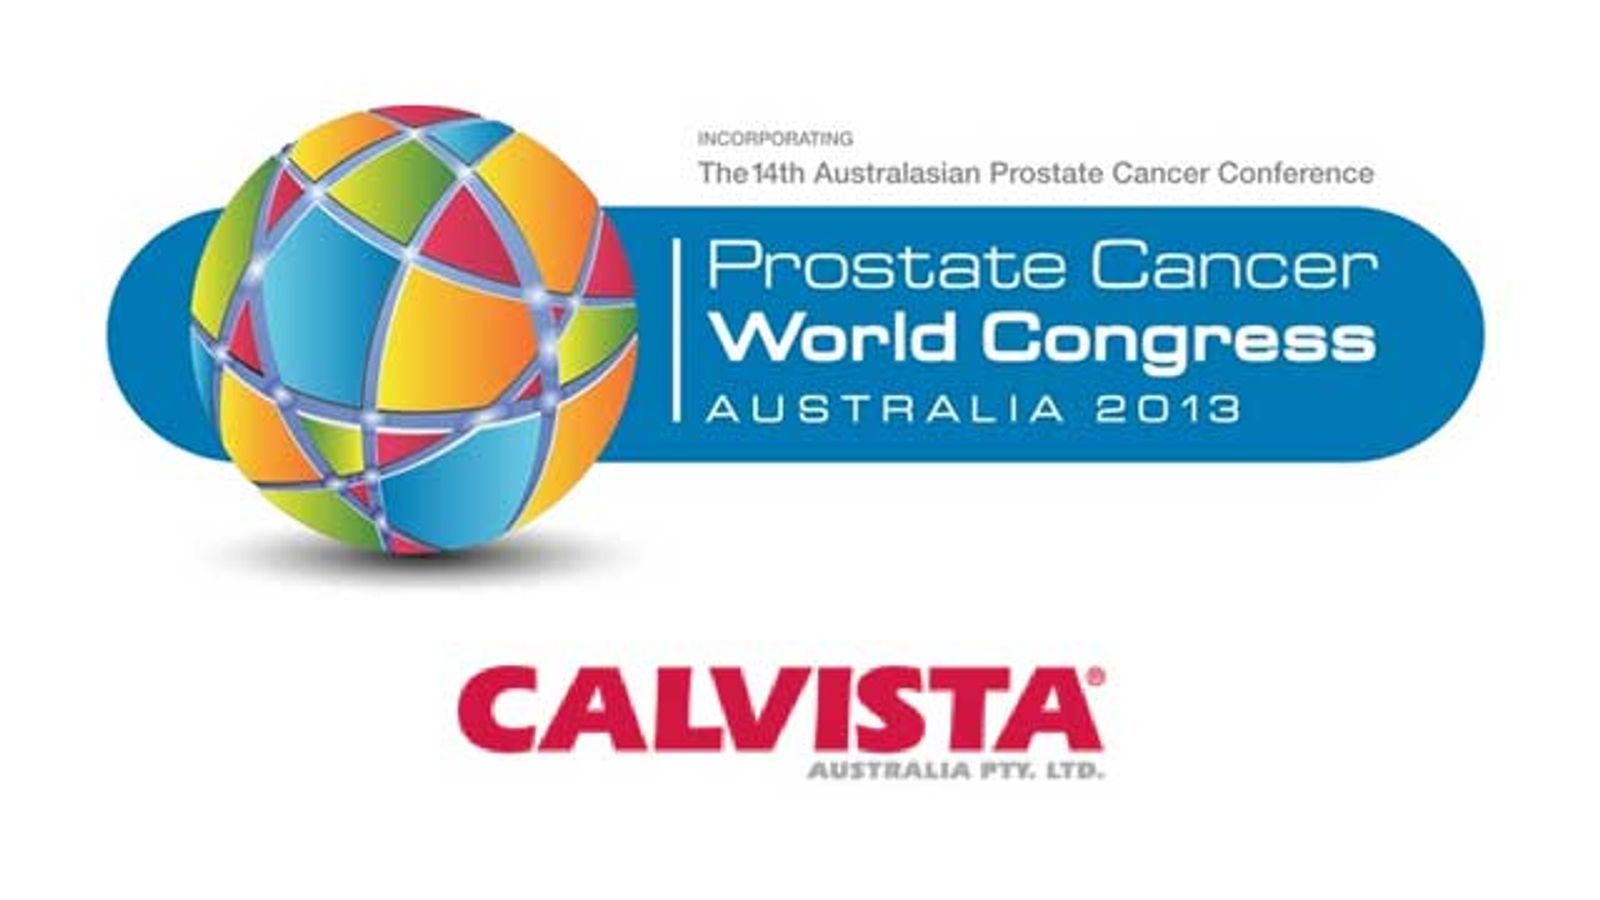 Calvista Signs On As Sponsor of Prostate Cancer Conference